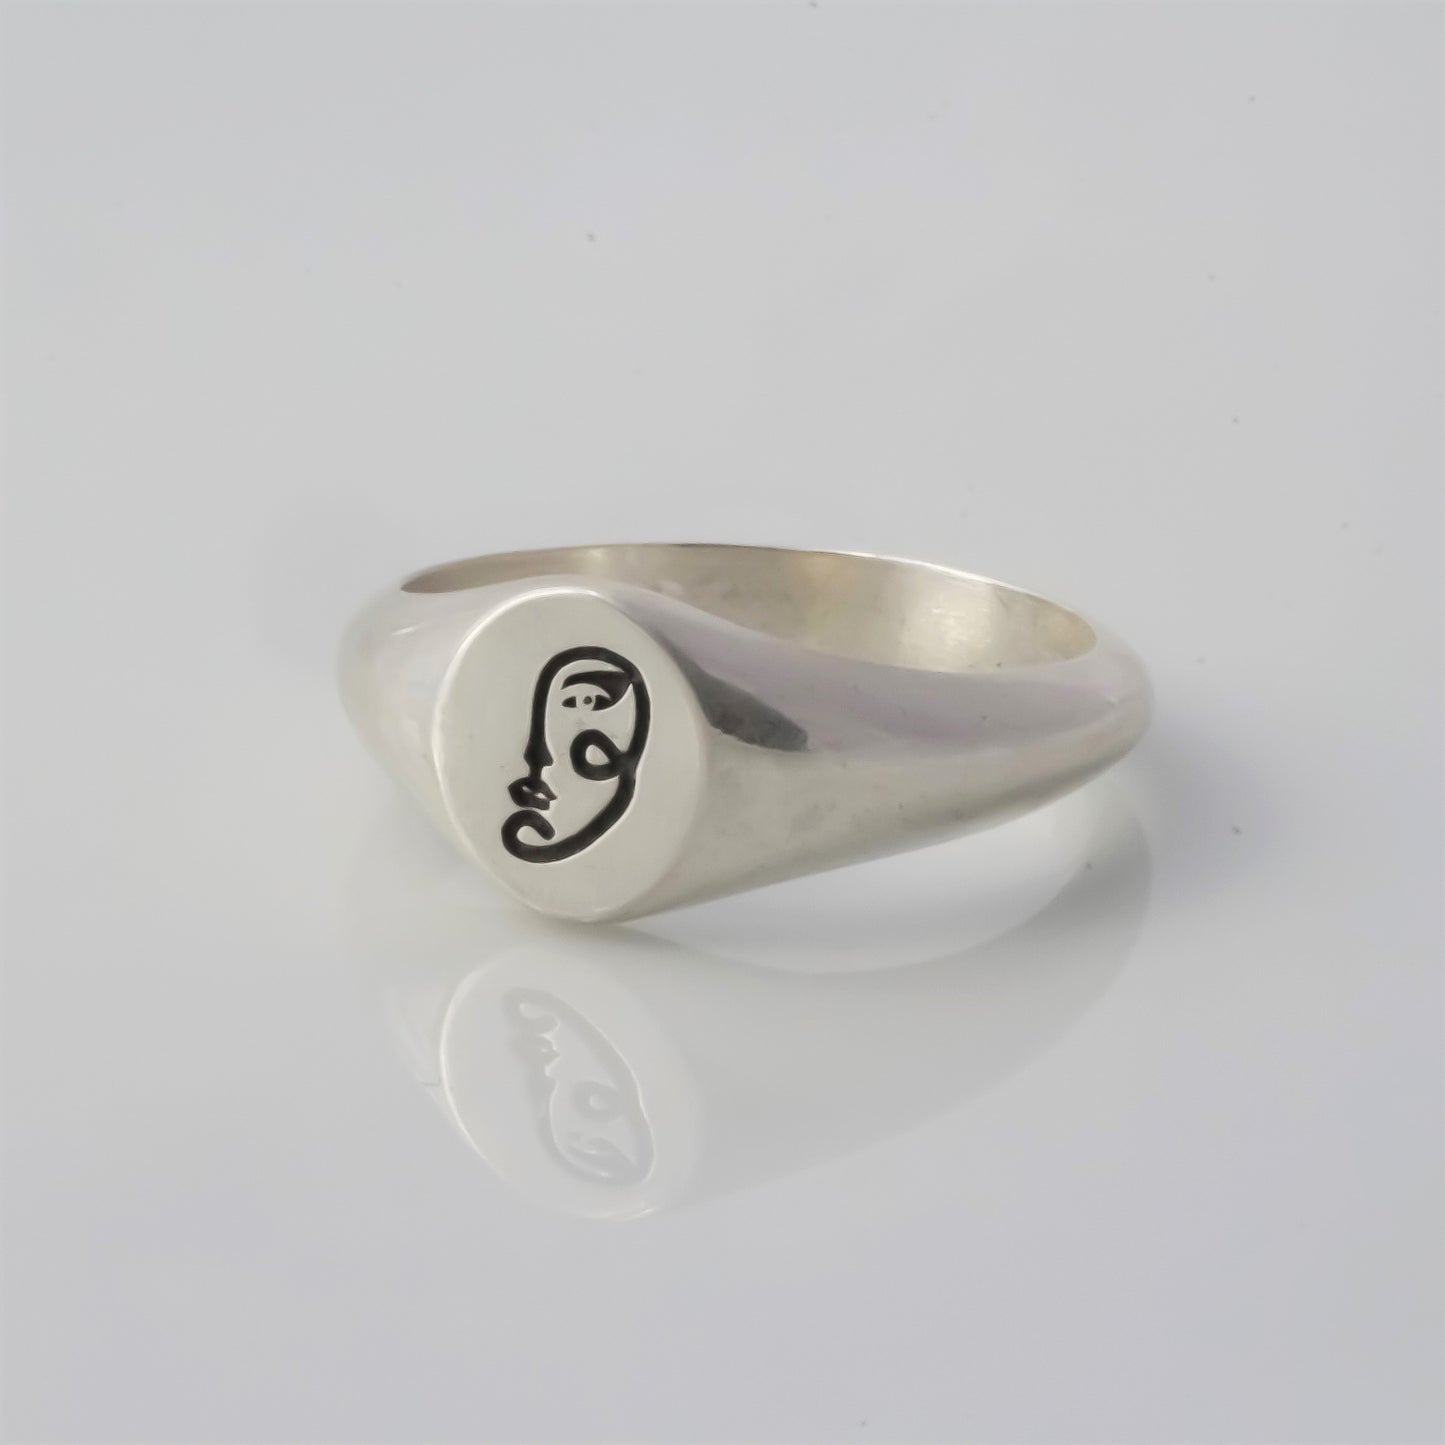 Picasso signet ring